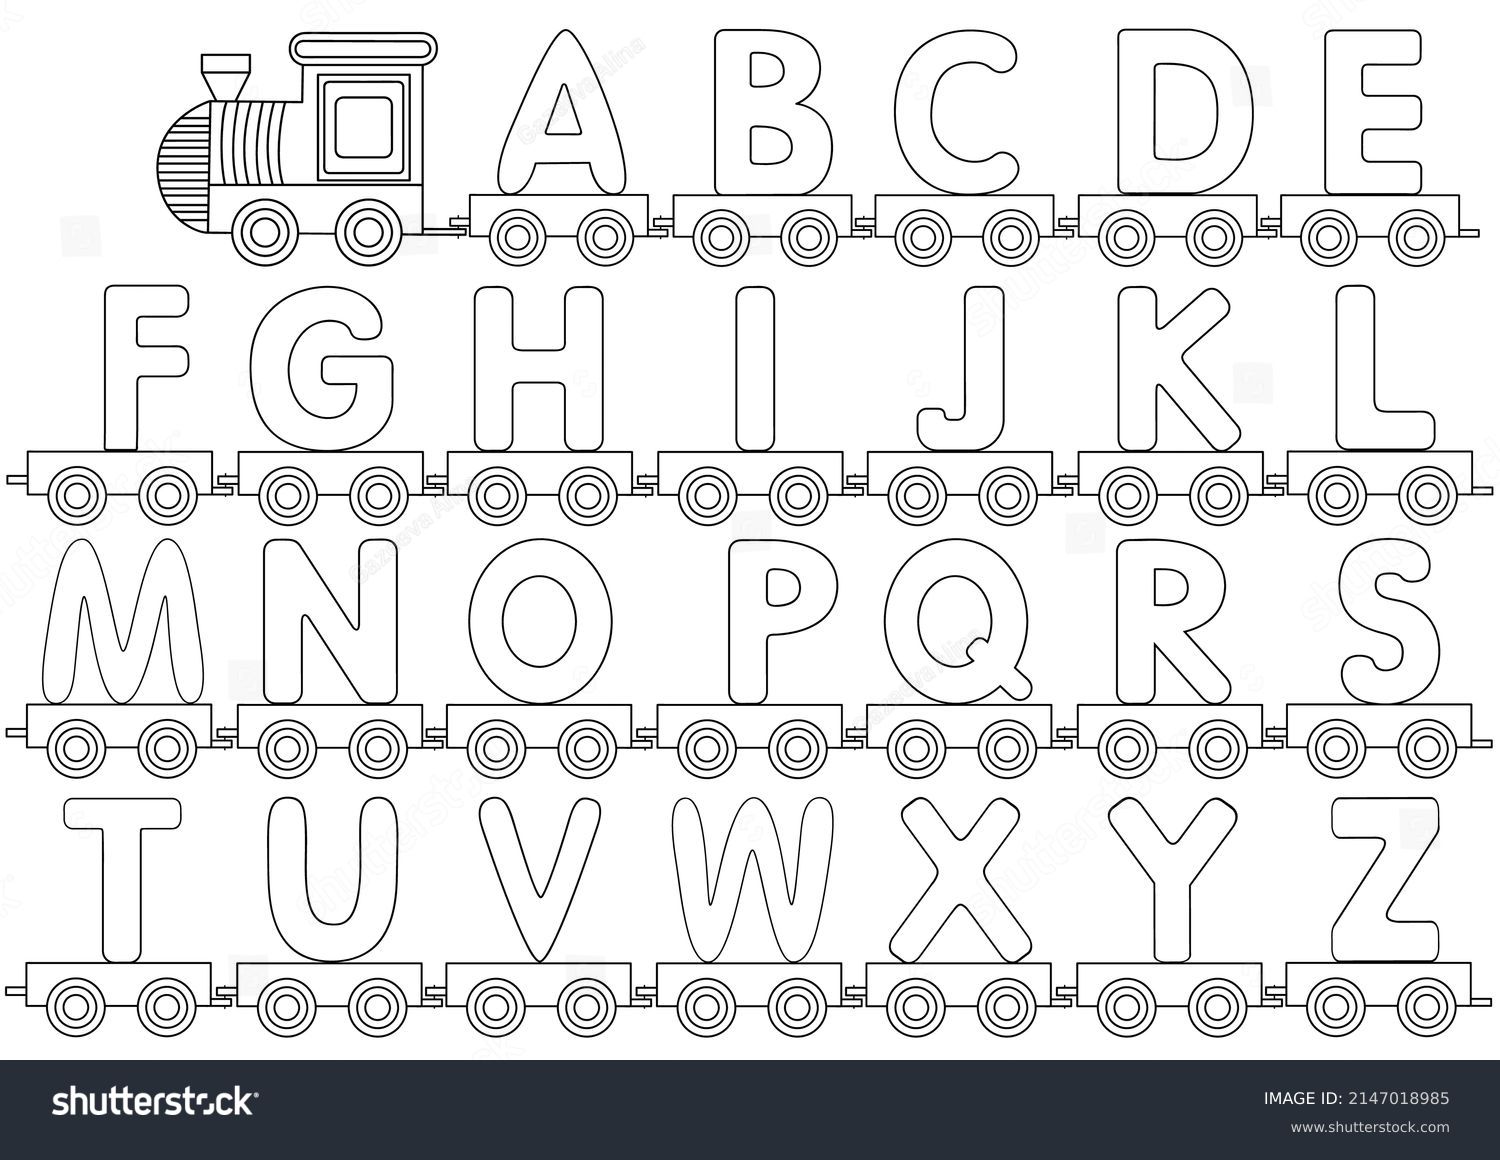 Alphabet coloring pages images stock photos d objects vectors